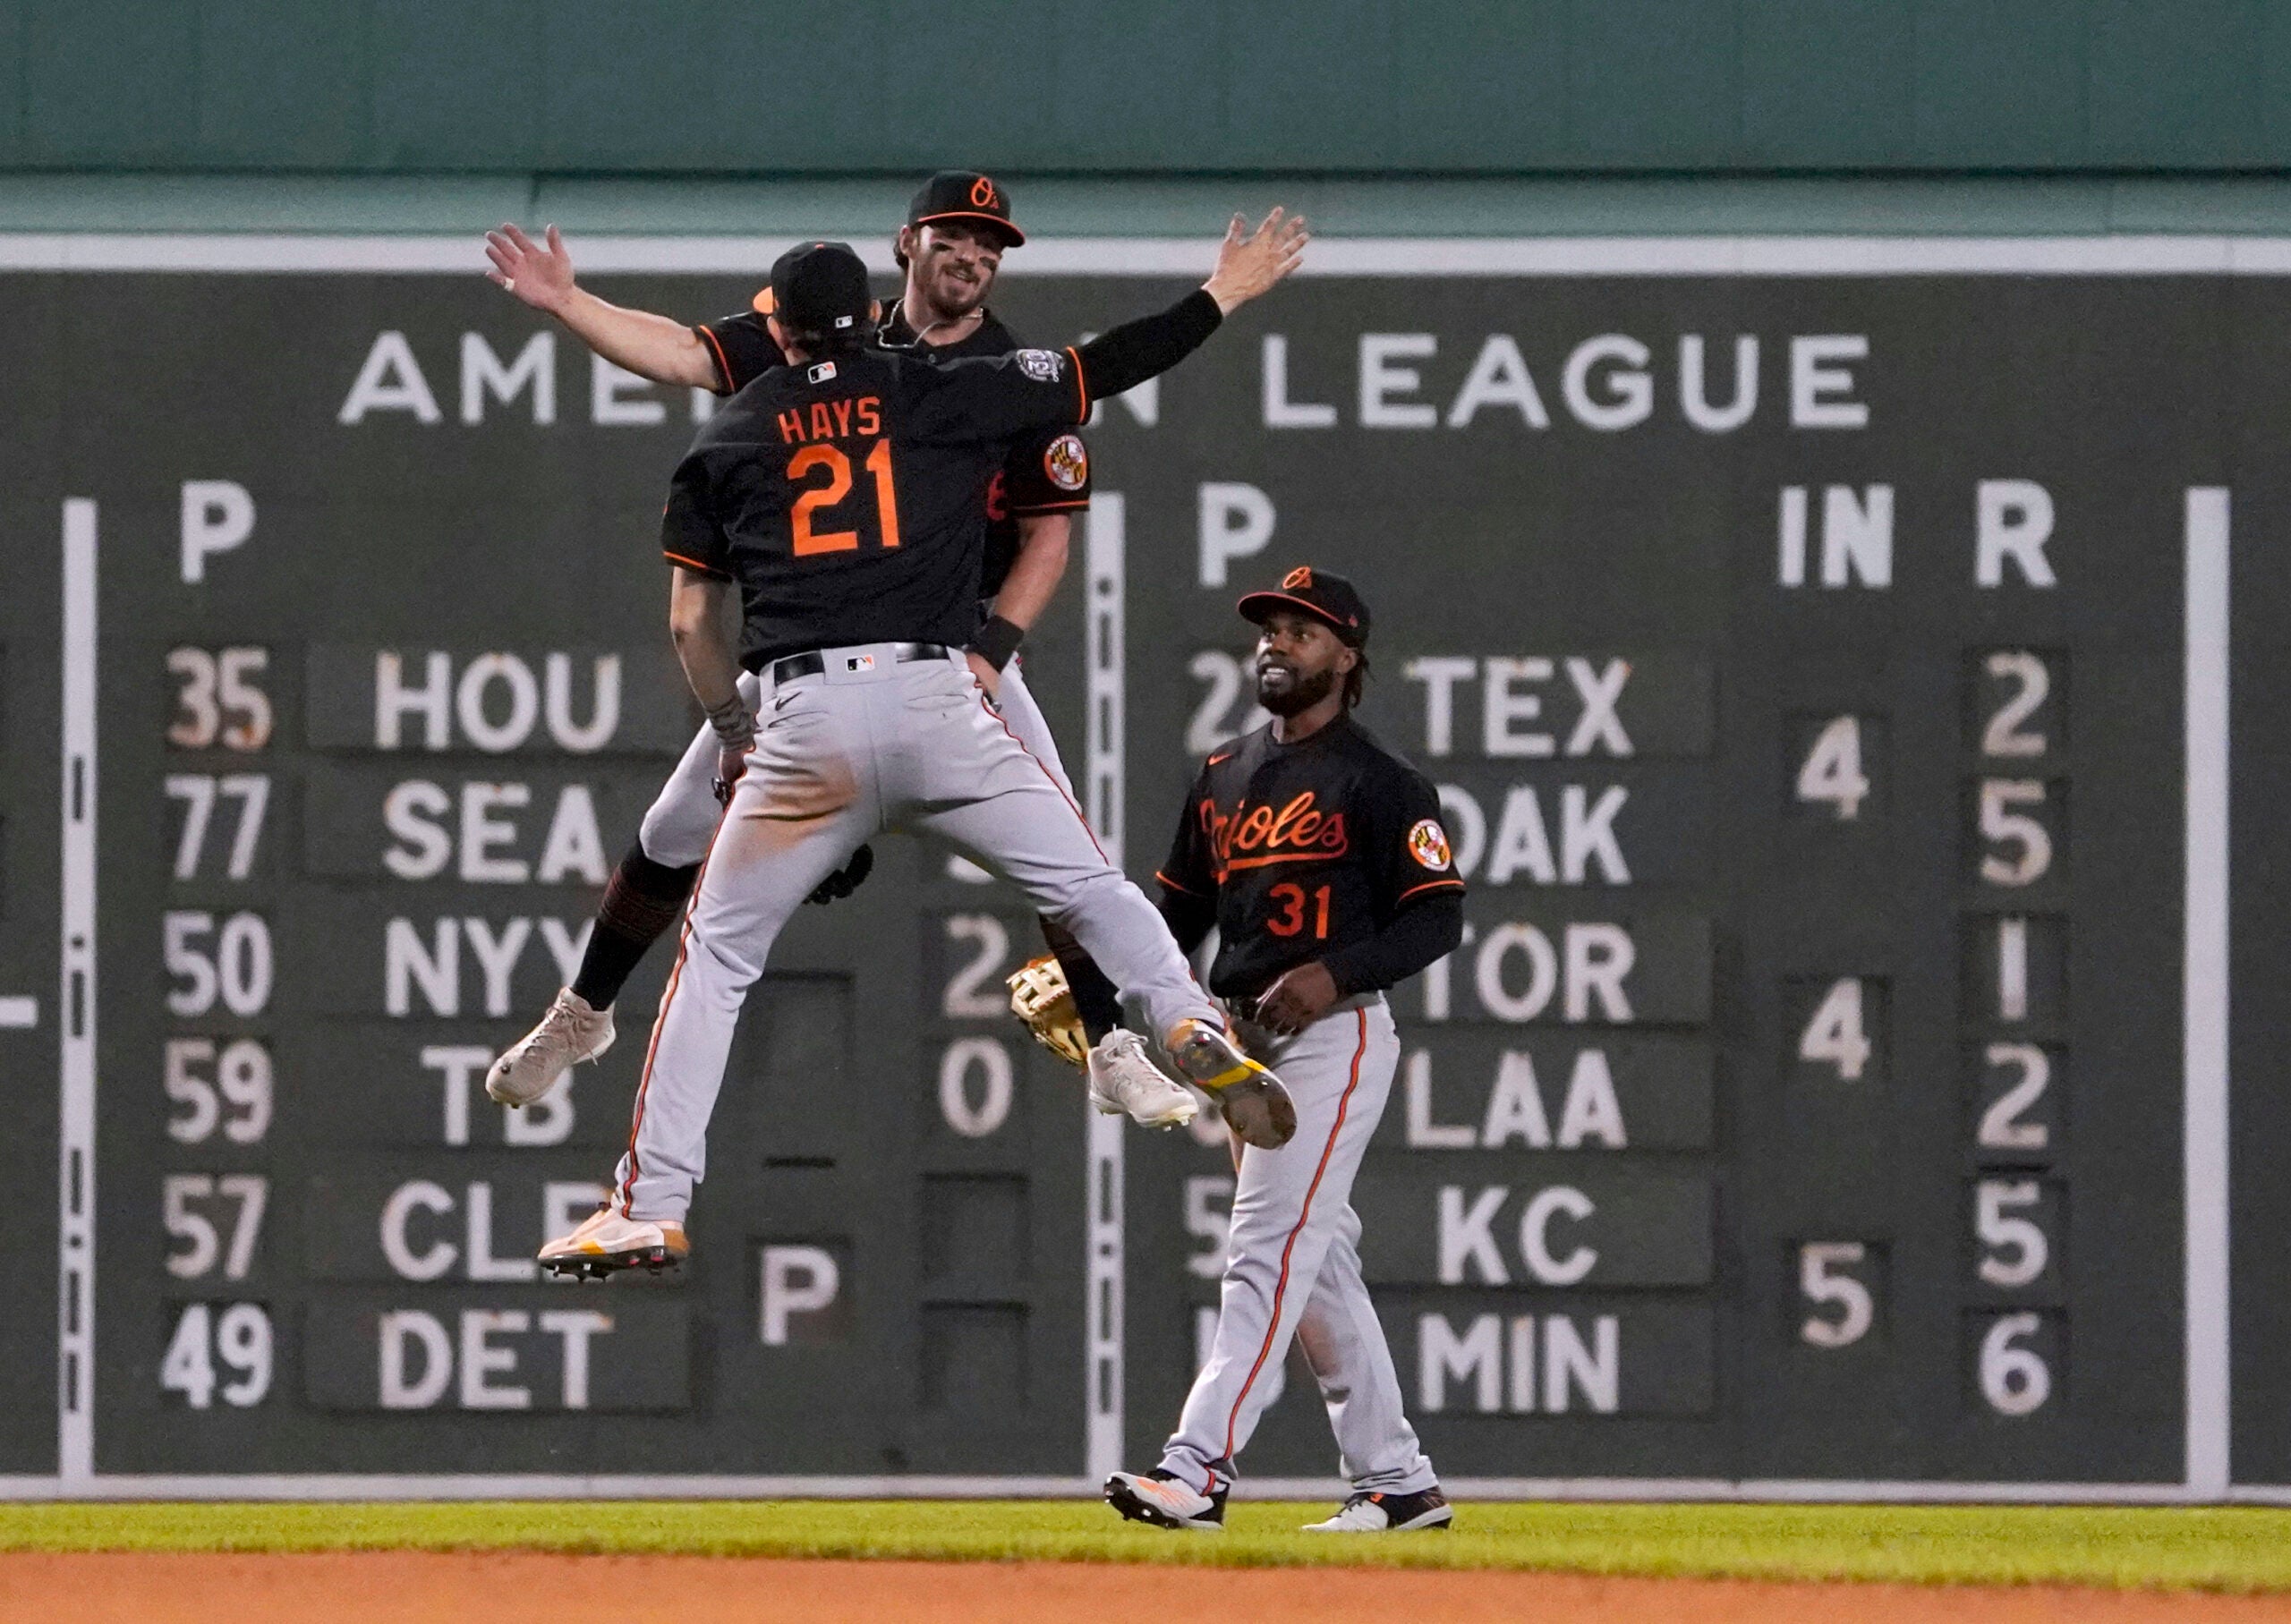 Red Sox blank Orioles to end 5-game skid